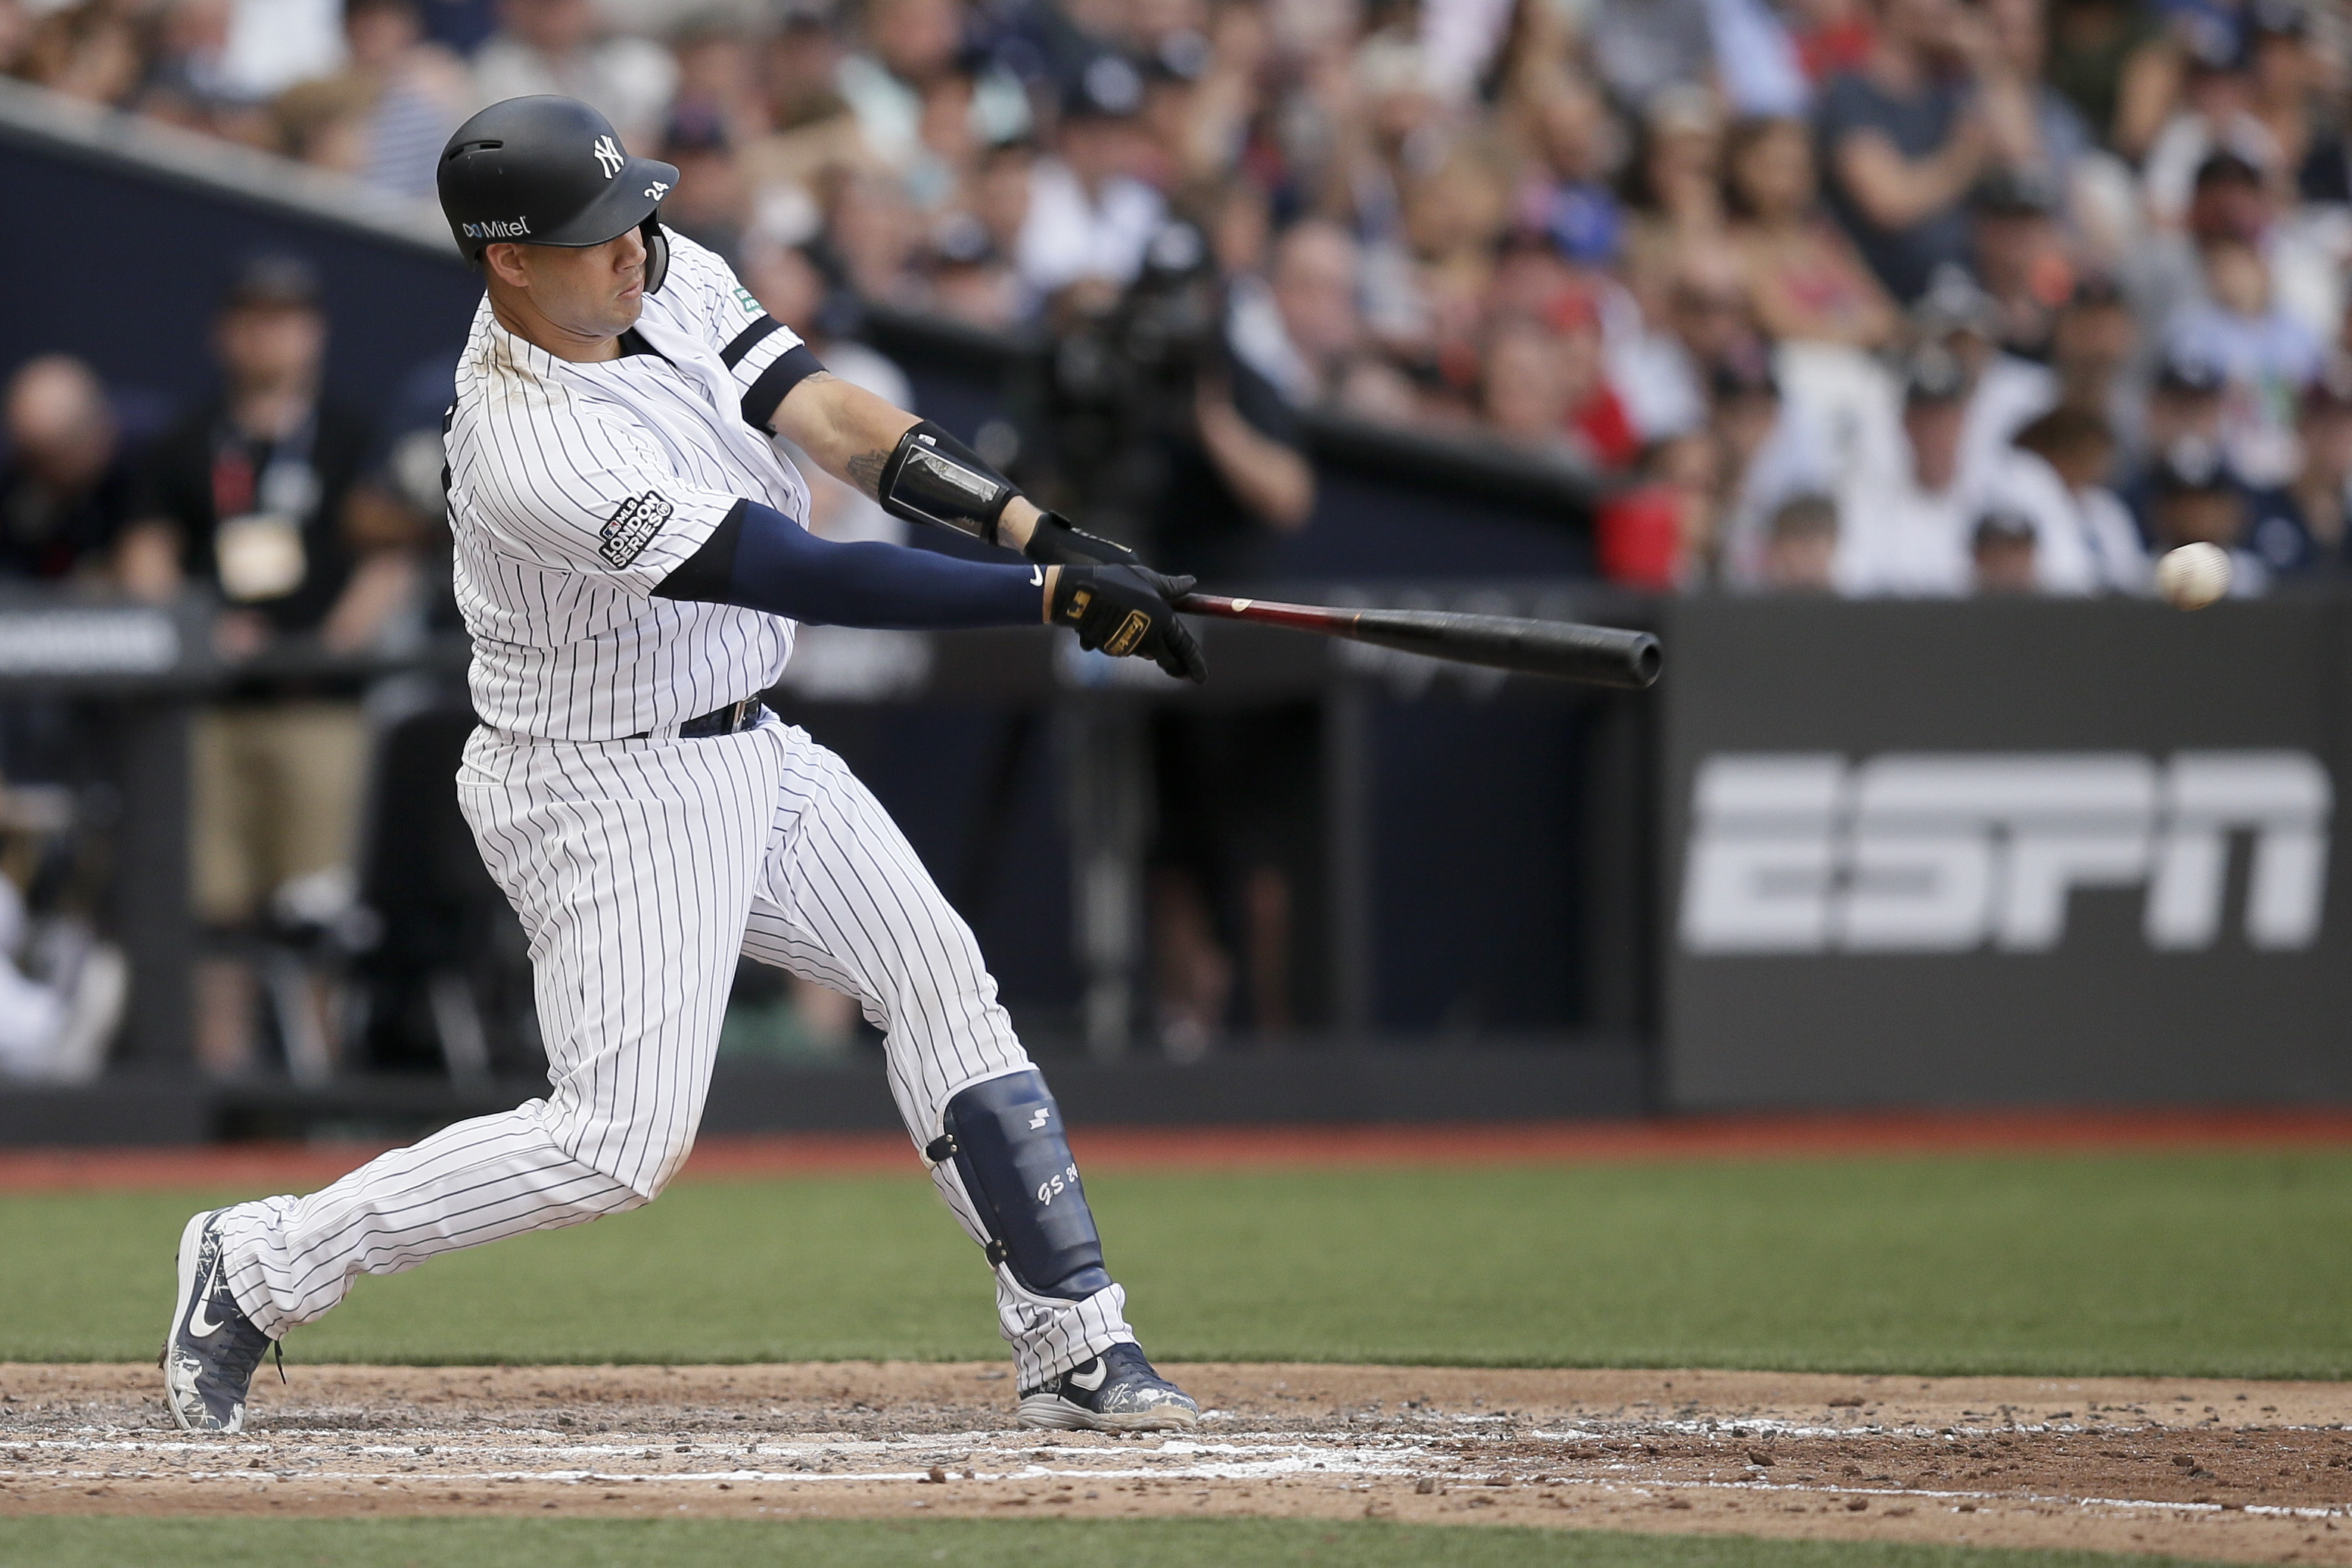 Comeback lifts Yanks to London sweep of Red Sox